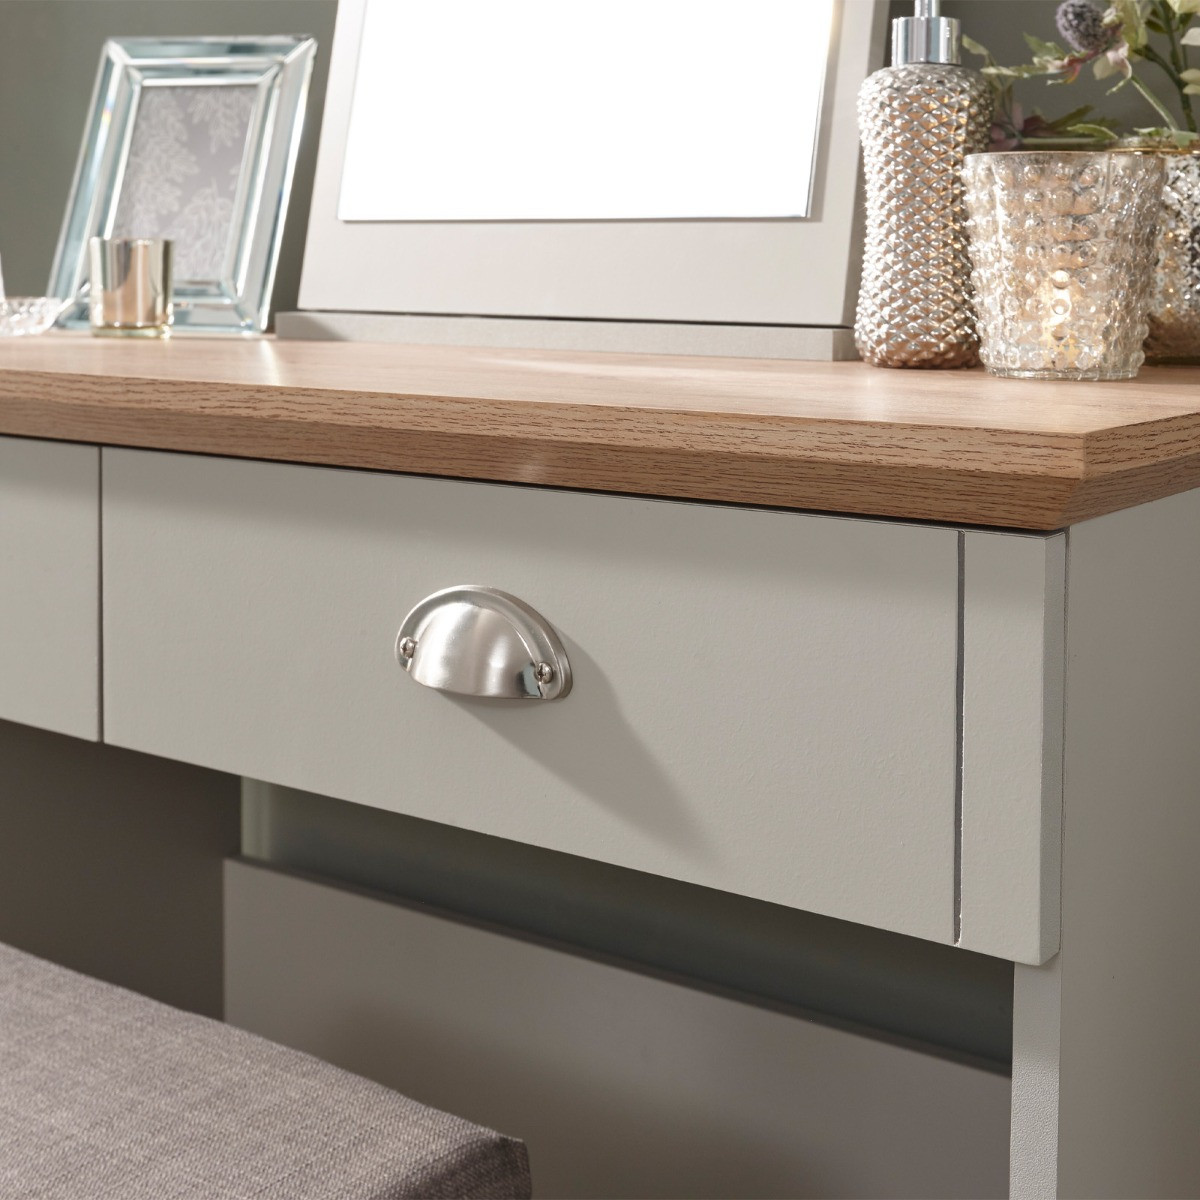 Kendal Dressing Table With Stool - Grey>